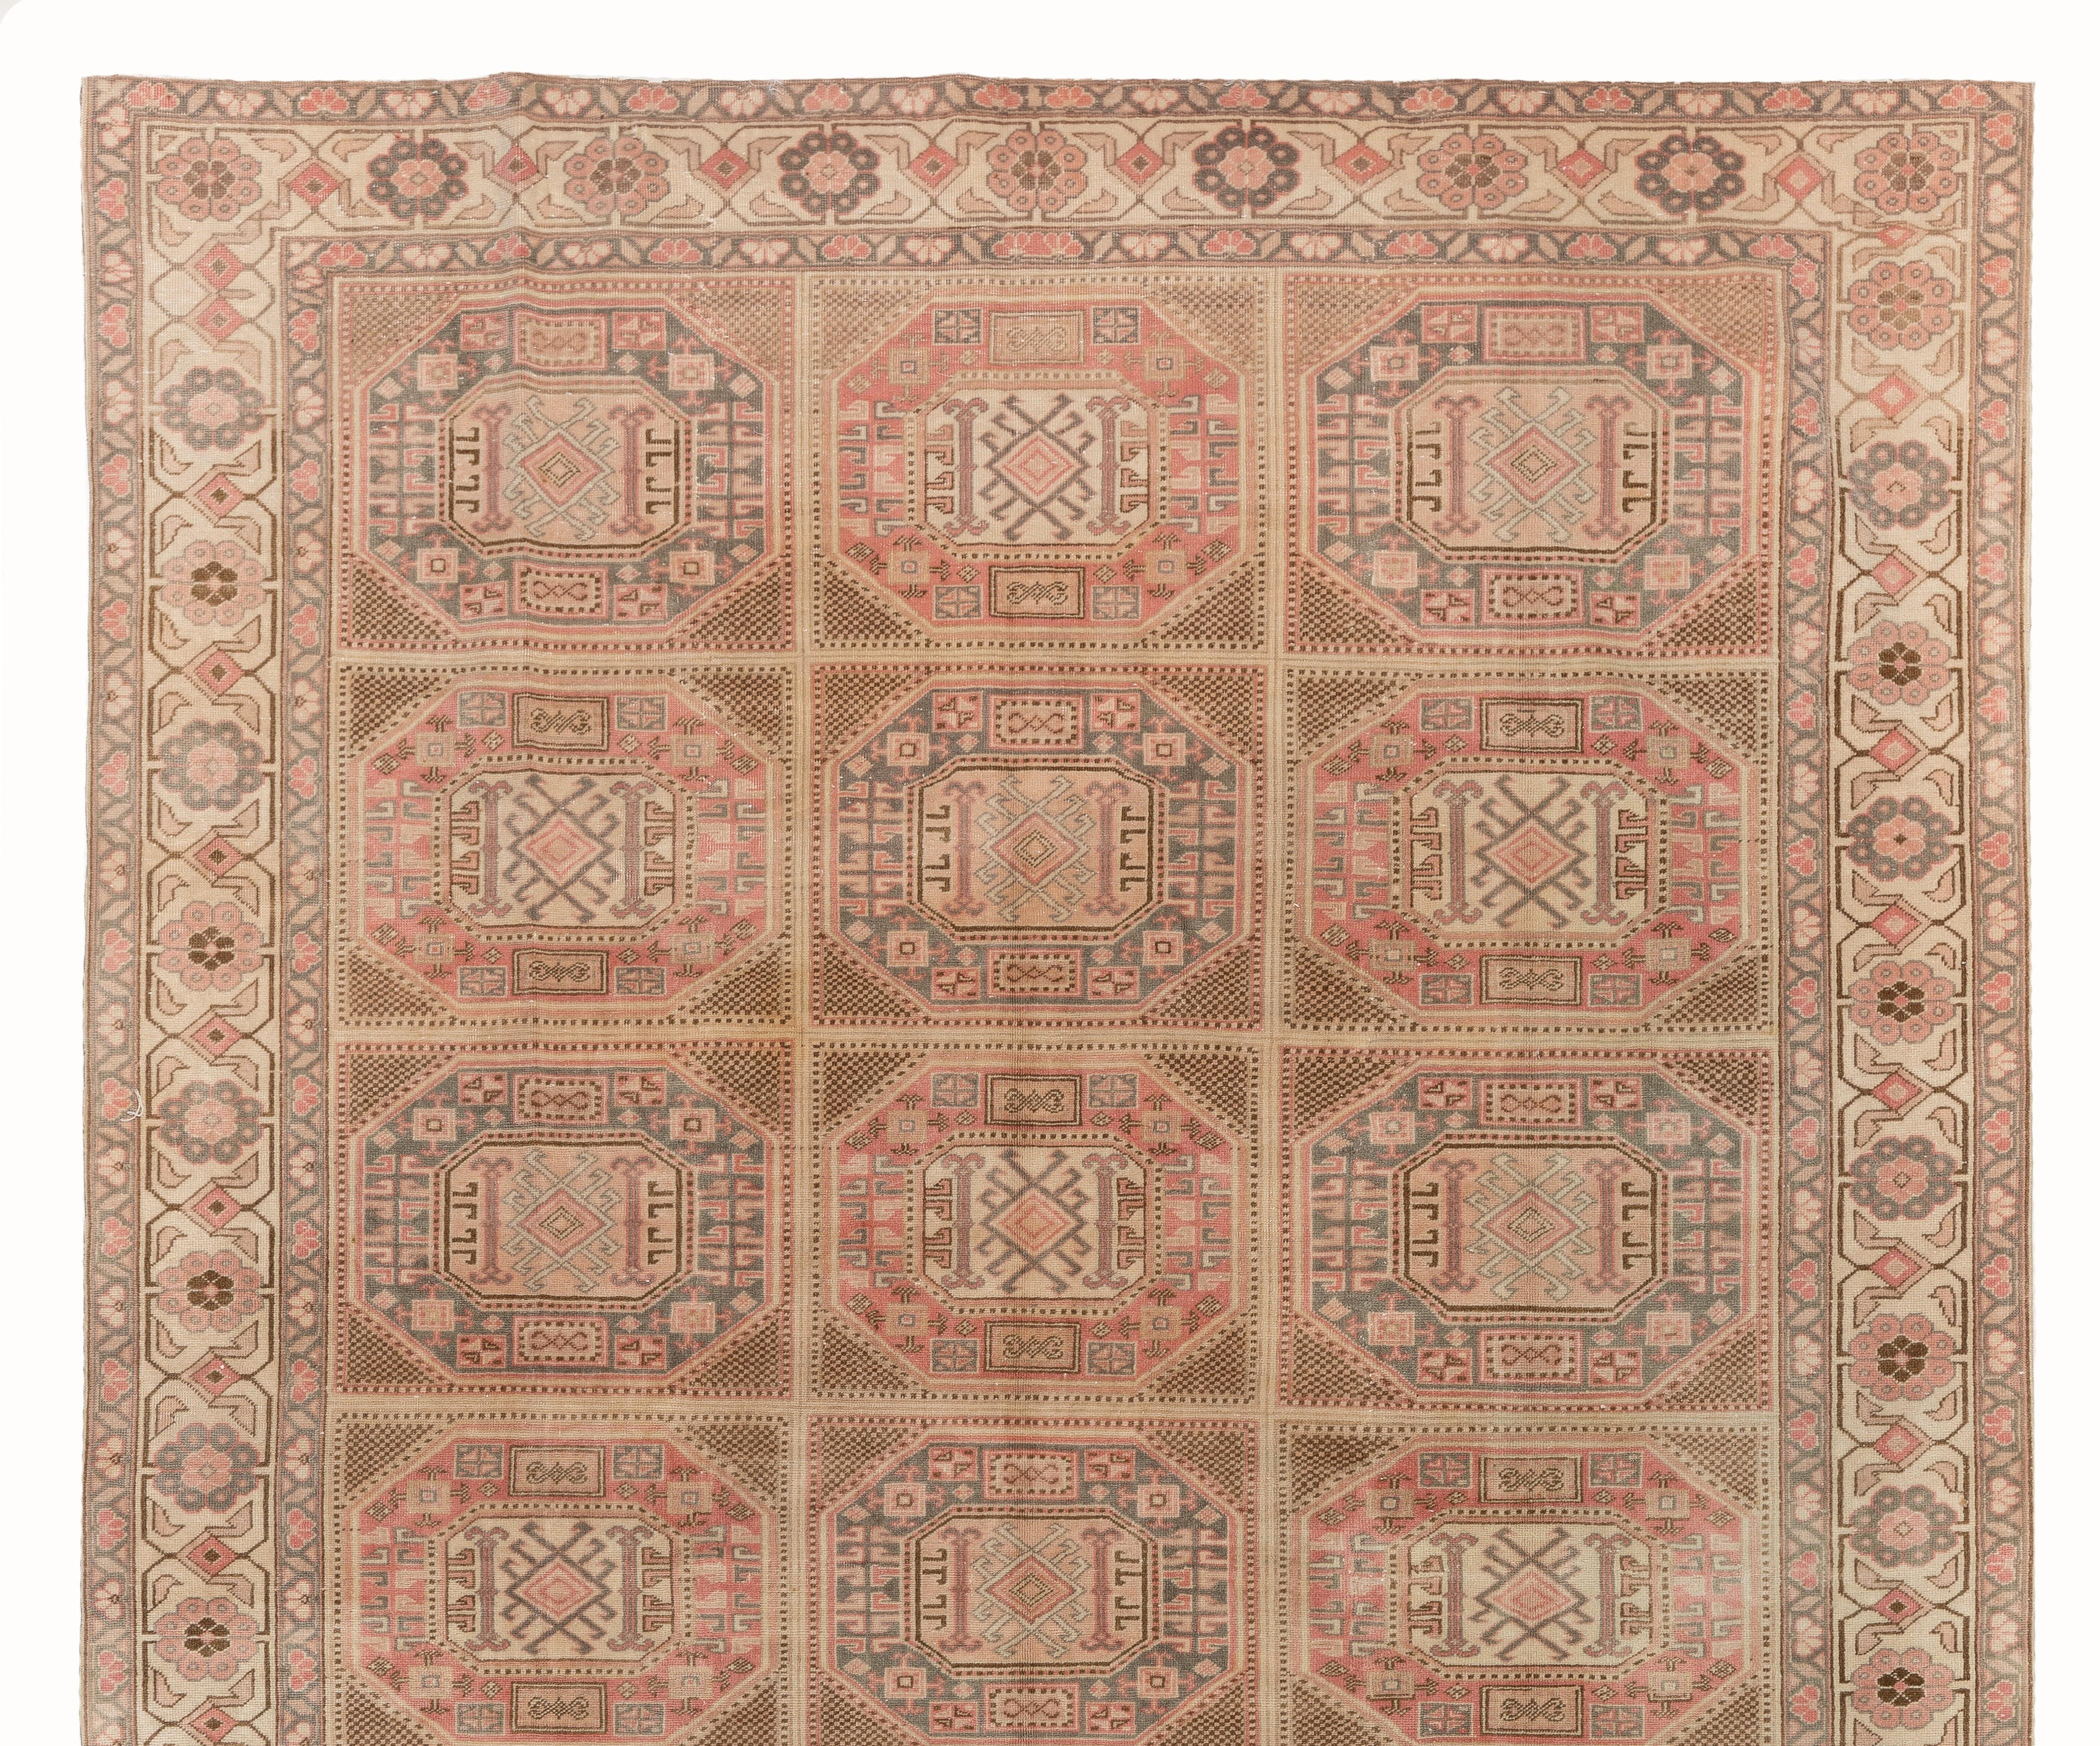 A finely hand knotted rug from the town of Kayseri in Central Anatolia with soft muted colors and well drawn geometric design with tribal patterns. Measures: 6.8 x 9.8 ft.
Soft medium wool pile on cotton foundation.
The rug is washed